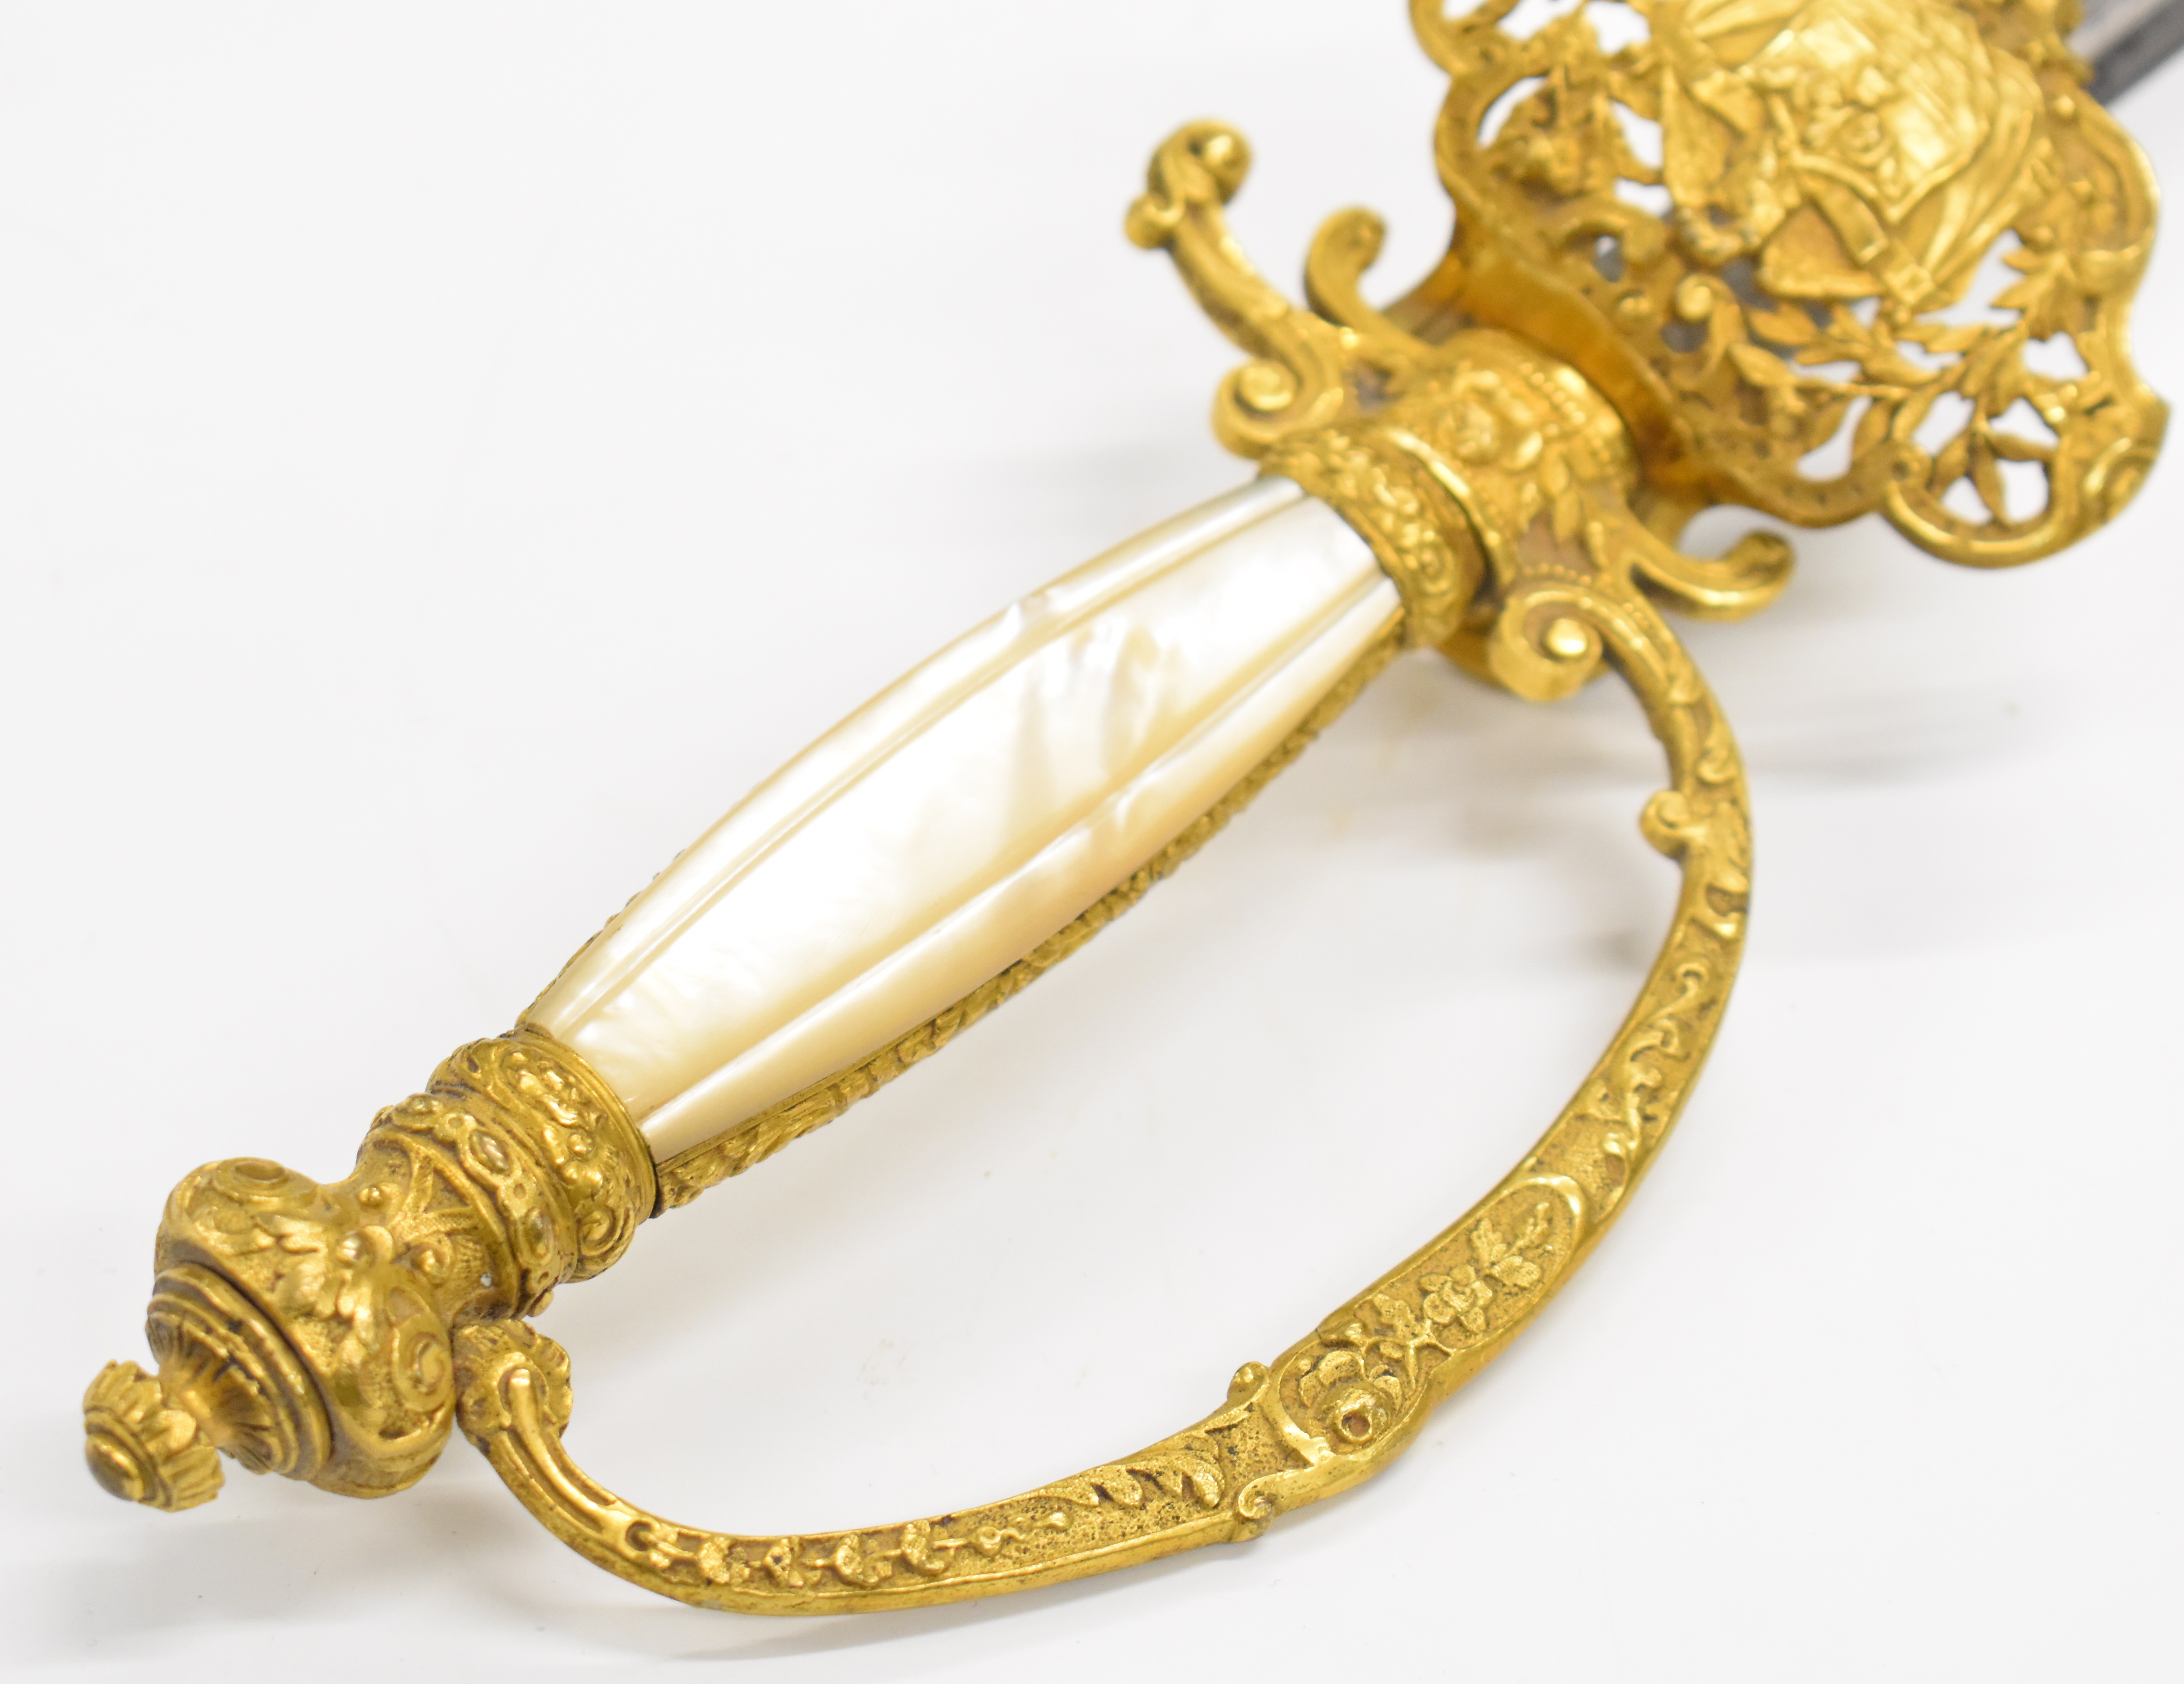 French made court sword retailed by Maria 14 Rue de Septembre Paris with gilt decorated hilt and - Image 4 of 11